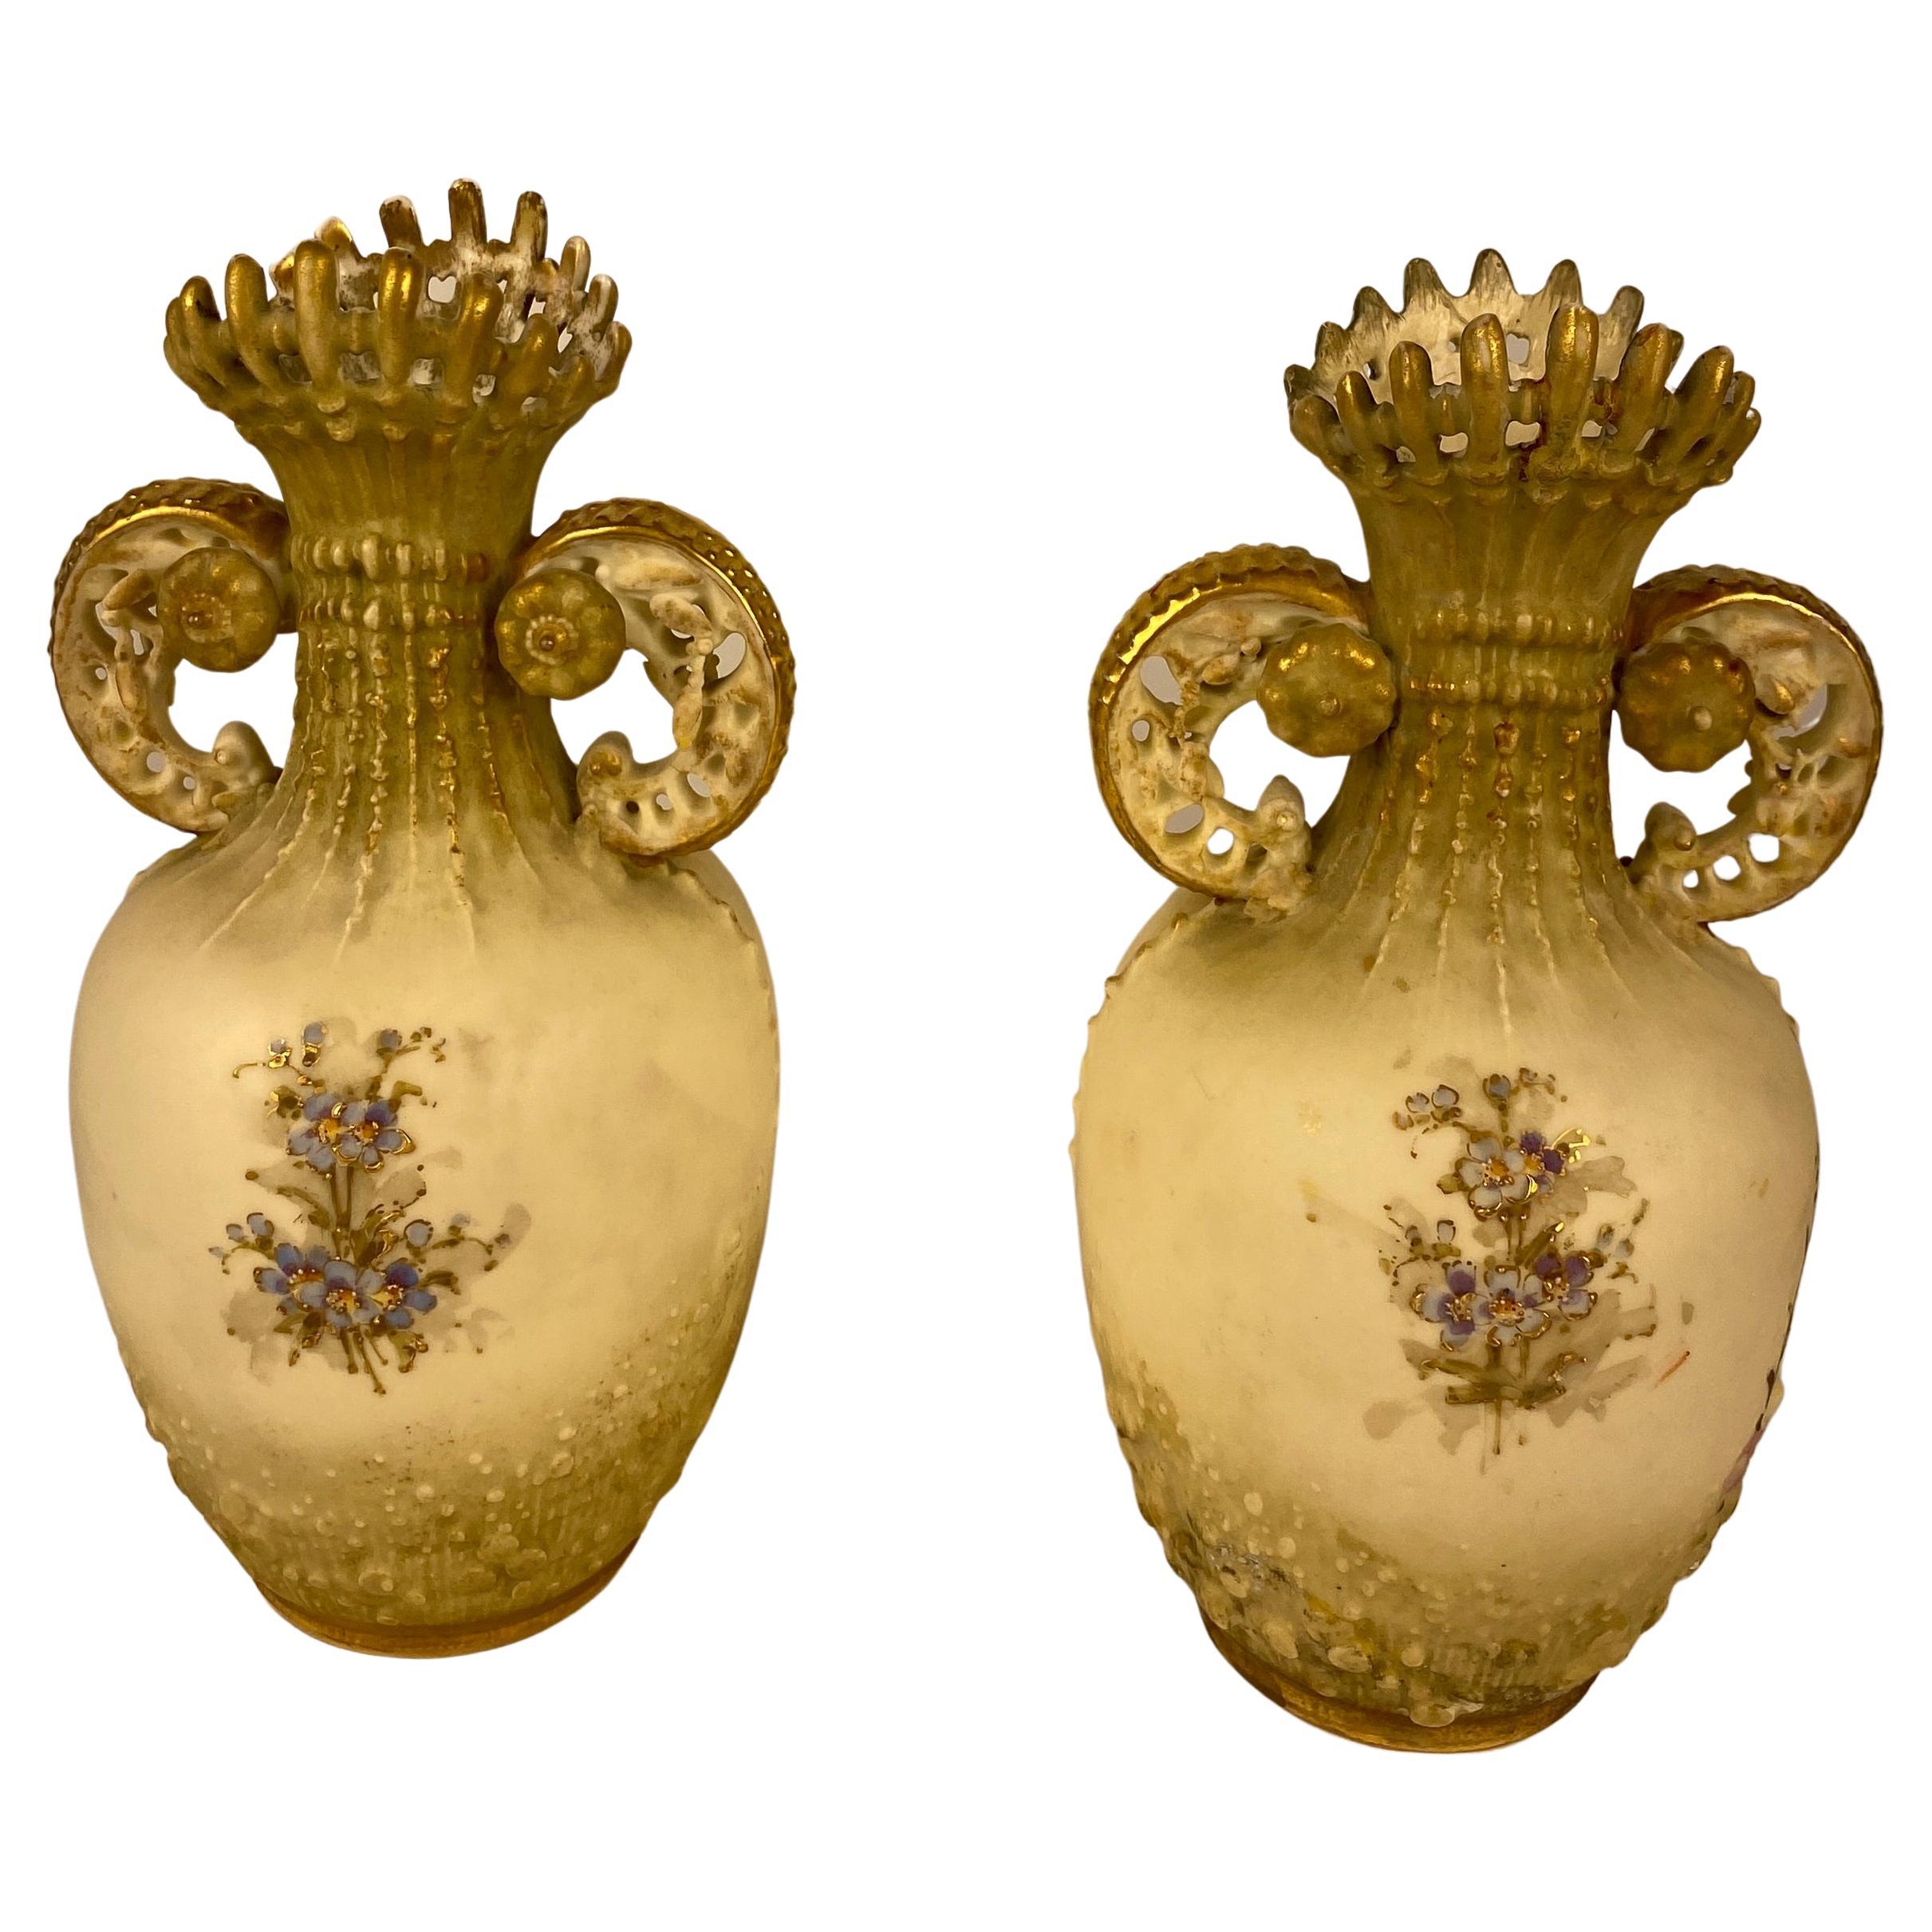 A superb pair of vases made in the manner of Royal Worcester pieces that were made around 1890. These vases are uniquely shaped and have a blush ivory Japanese lotus decoration.

This style was influenced by the wonderful Persian artefacts that